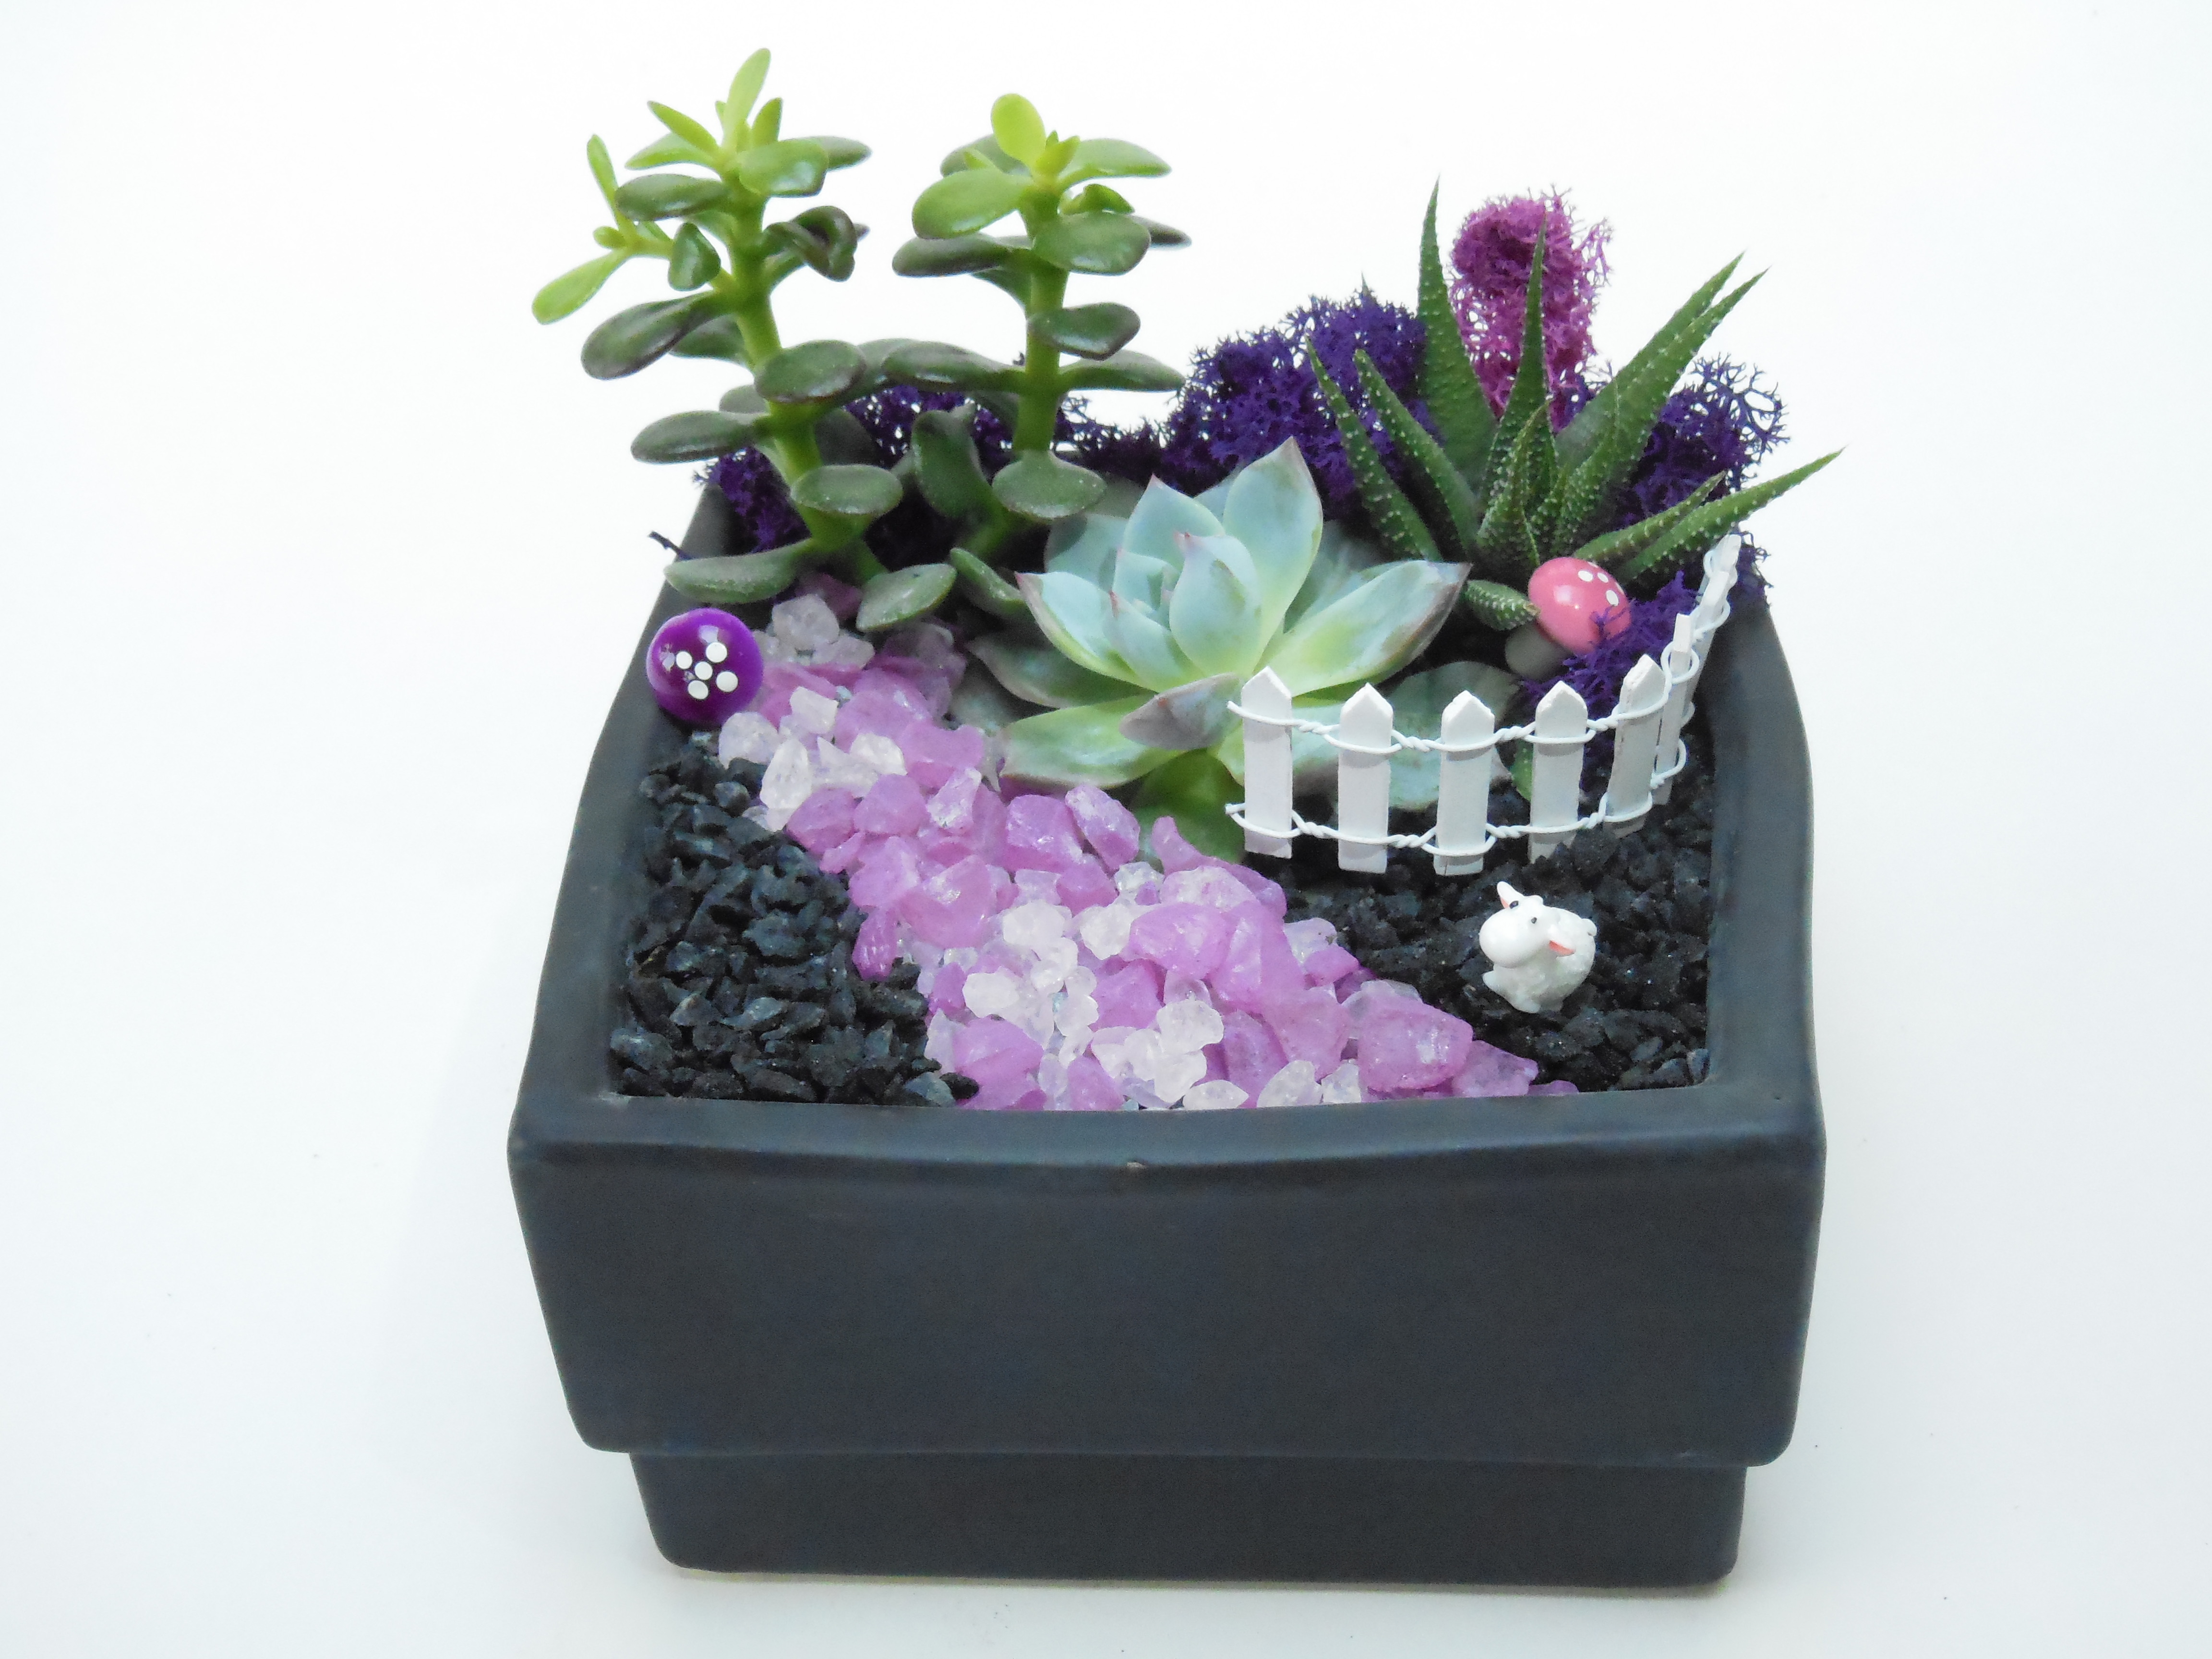 A Sheep Garden  Black Square Ceramic plant nite project by Yaymaker